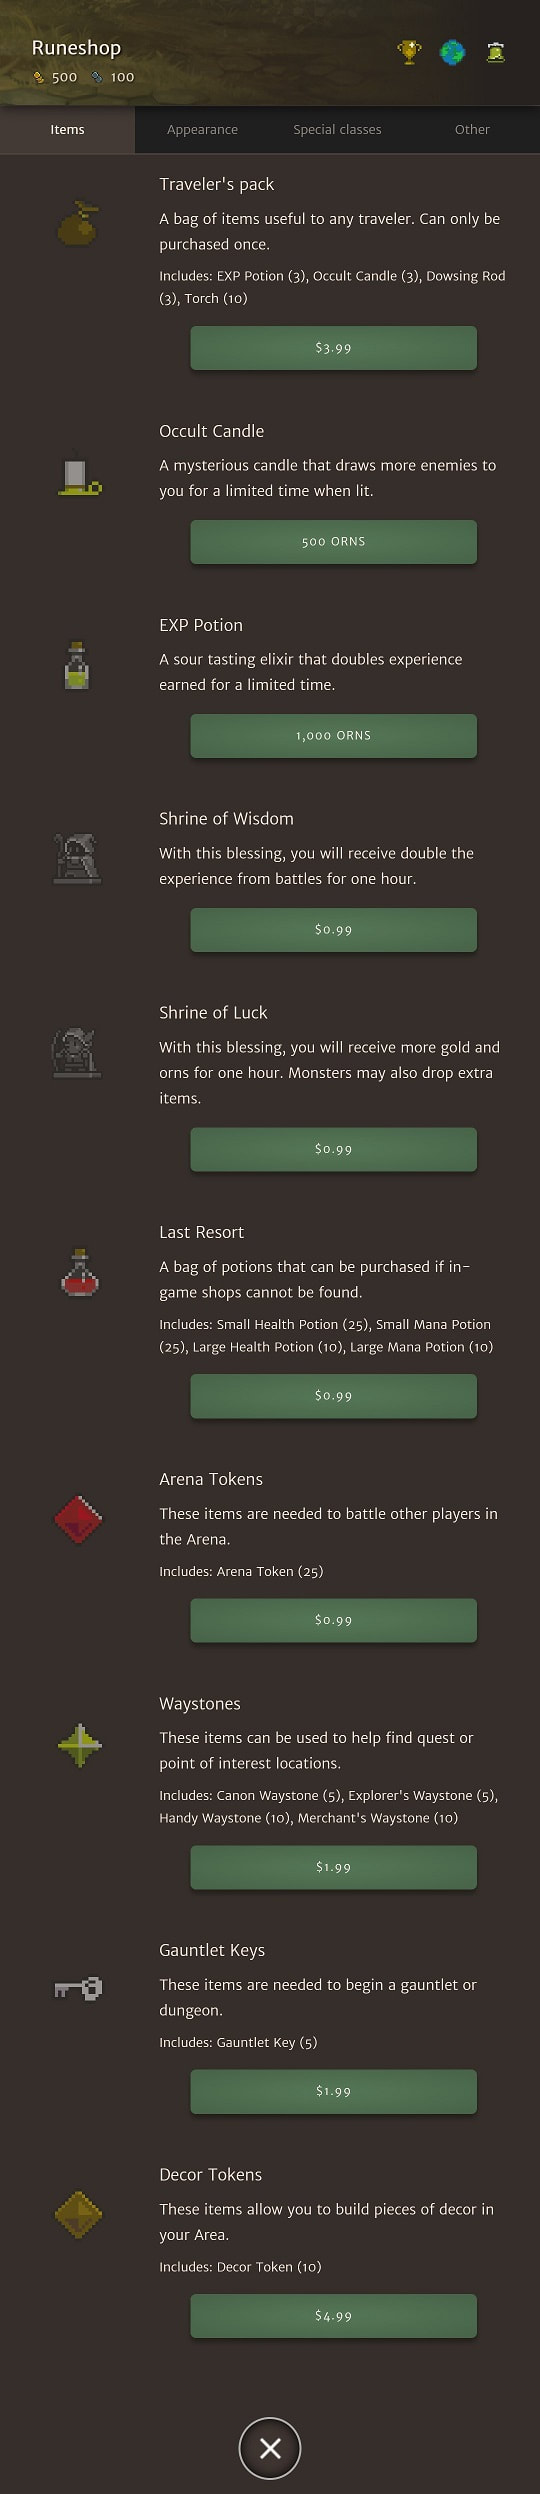 List of items available for purchase in the Orna Runeshop